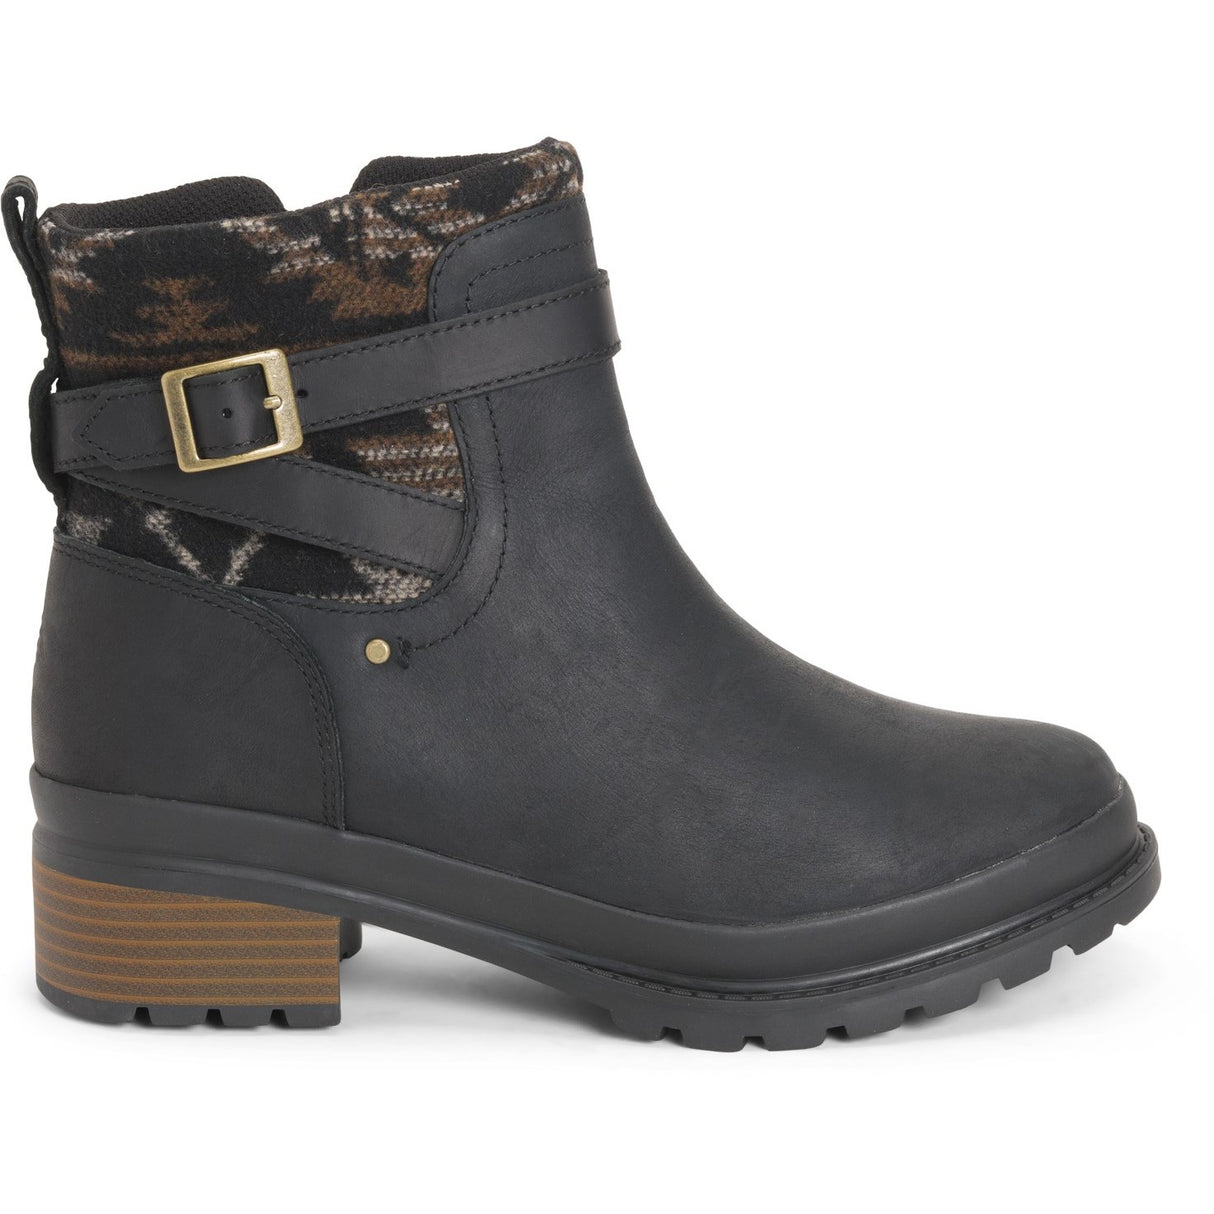 Muck Boot Liberty Ankel Supreme Boots